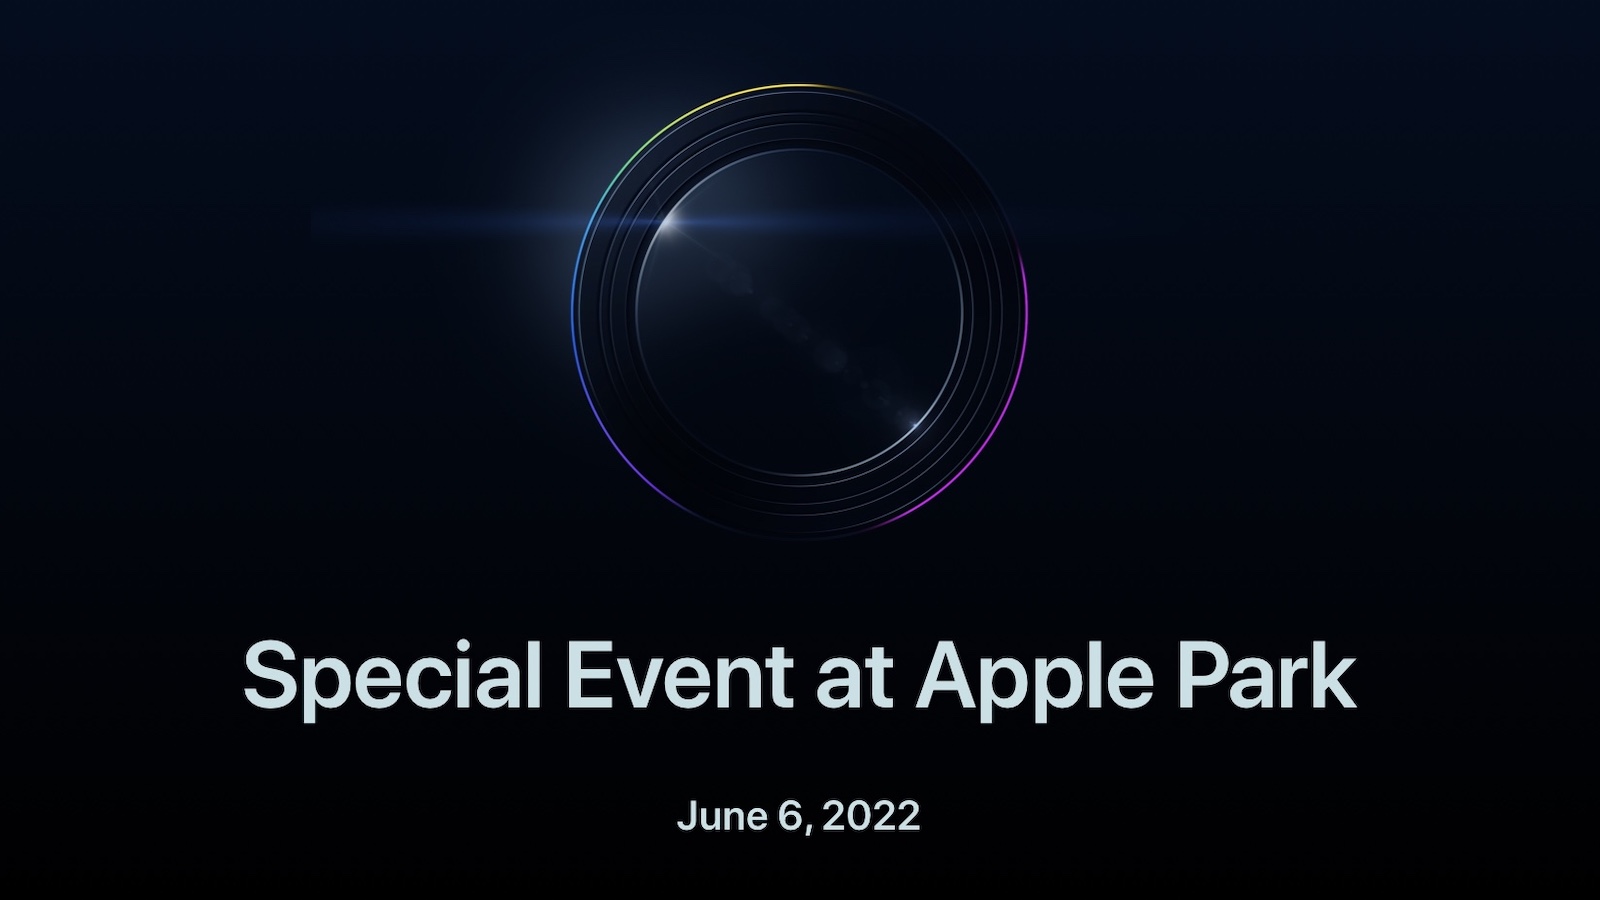 Apple Park Tours Possibly Cancelled at WWDC 2022